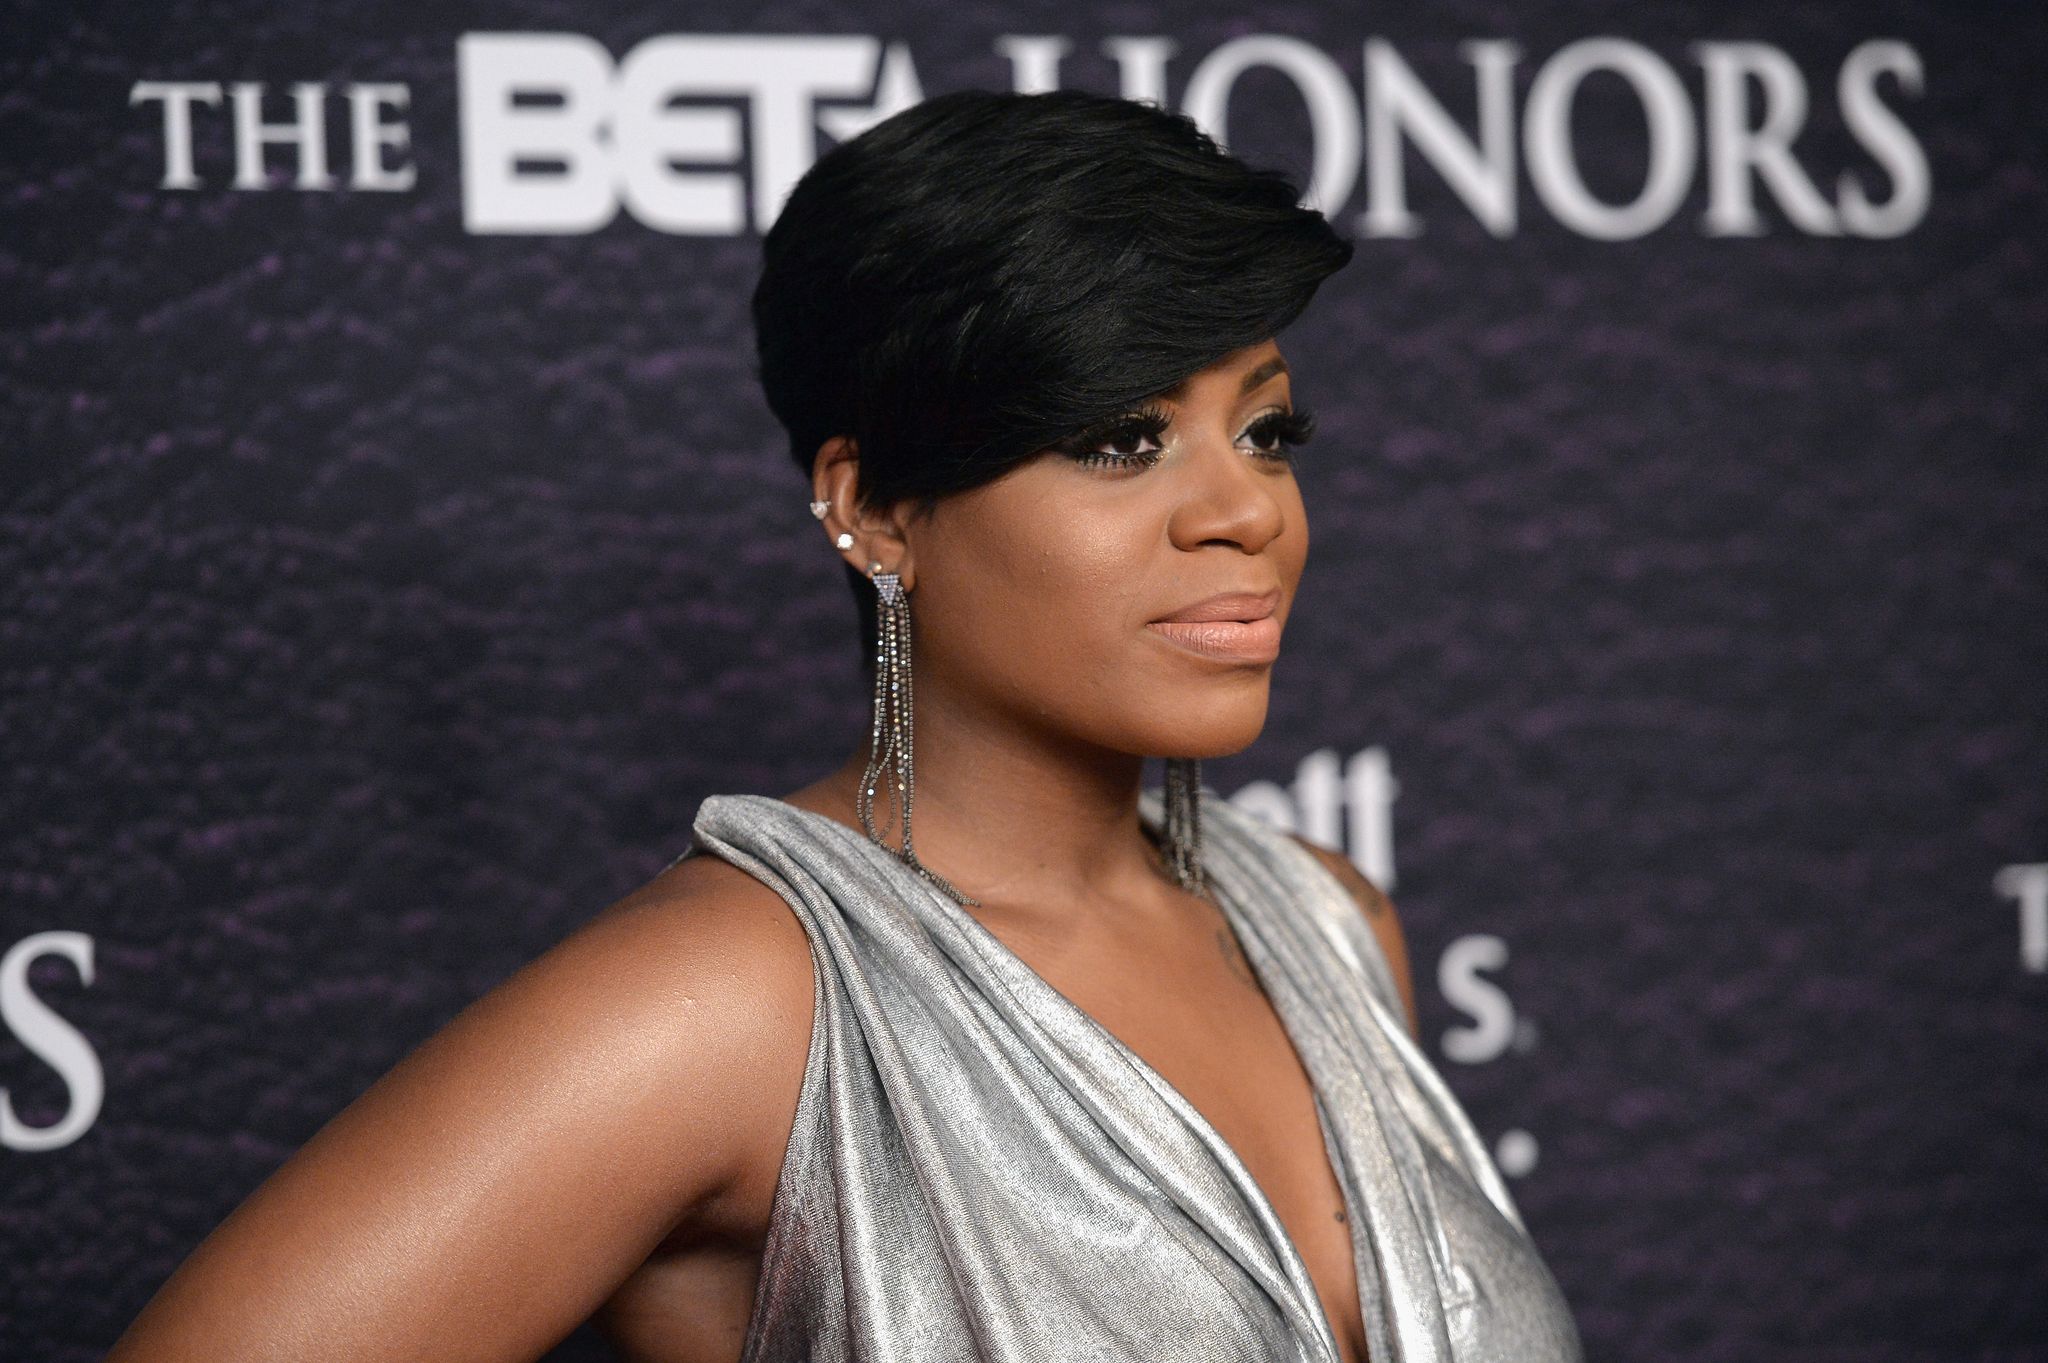 Fantasia at the BET Honors 2016 in Washington on March 5, 2016 |  Photo: Getty Images